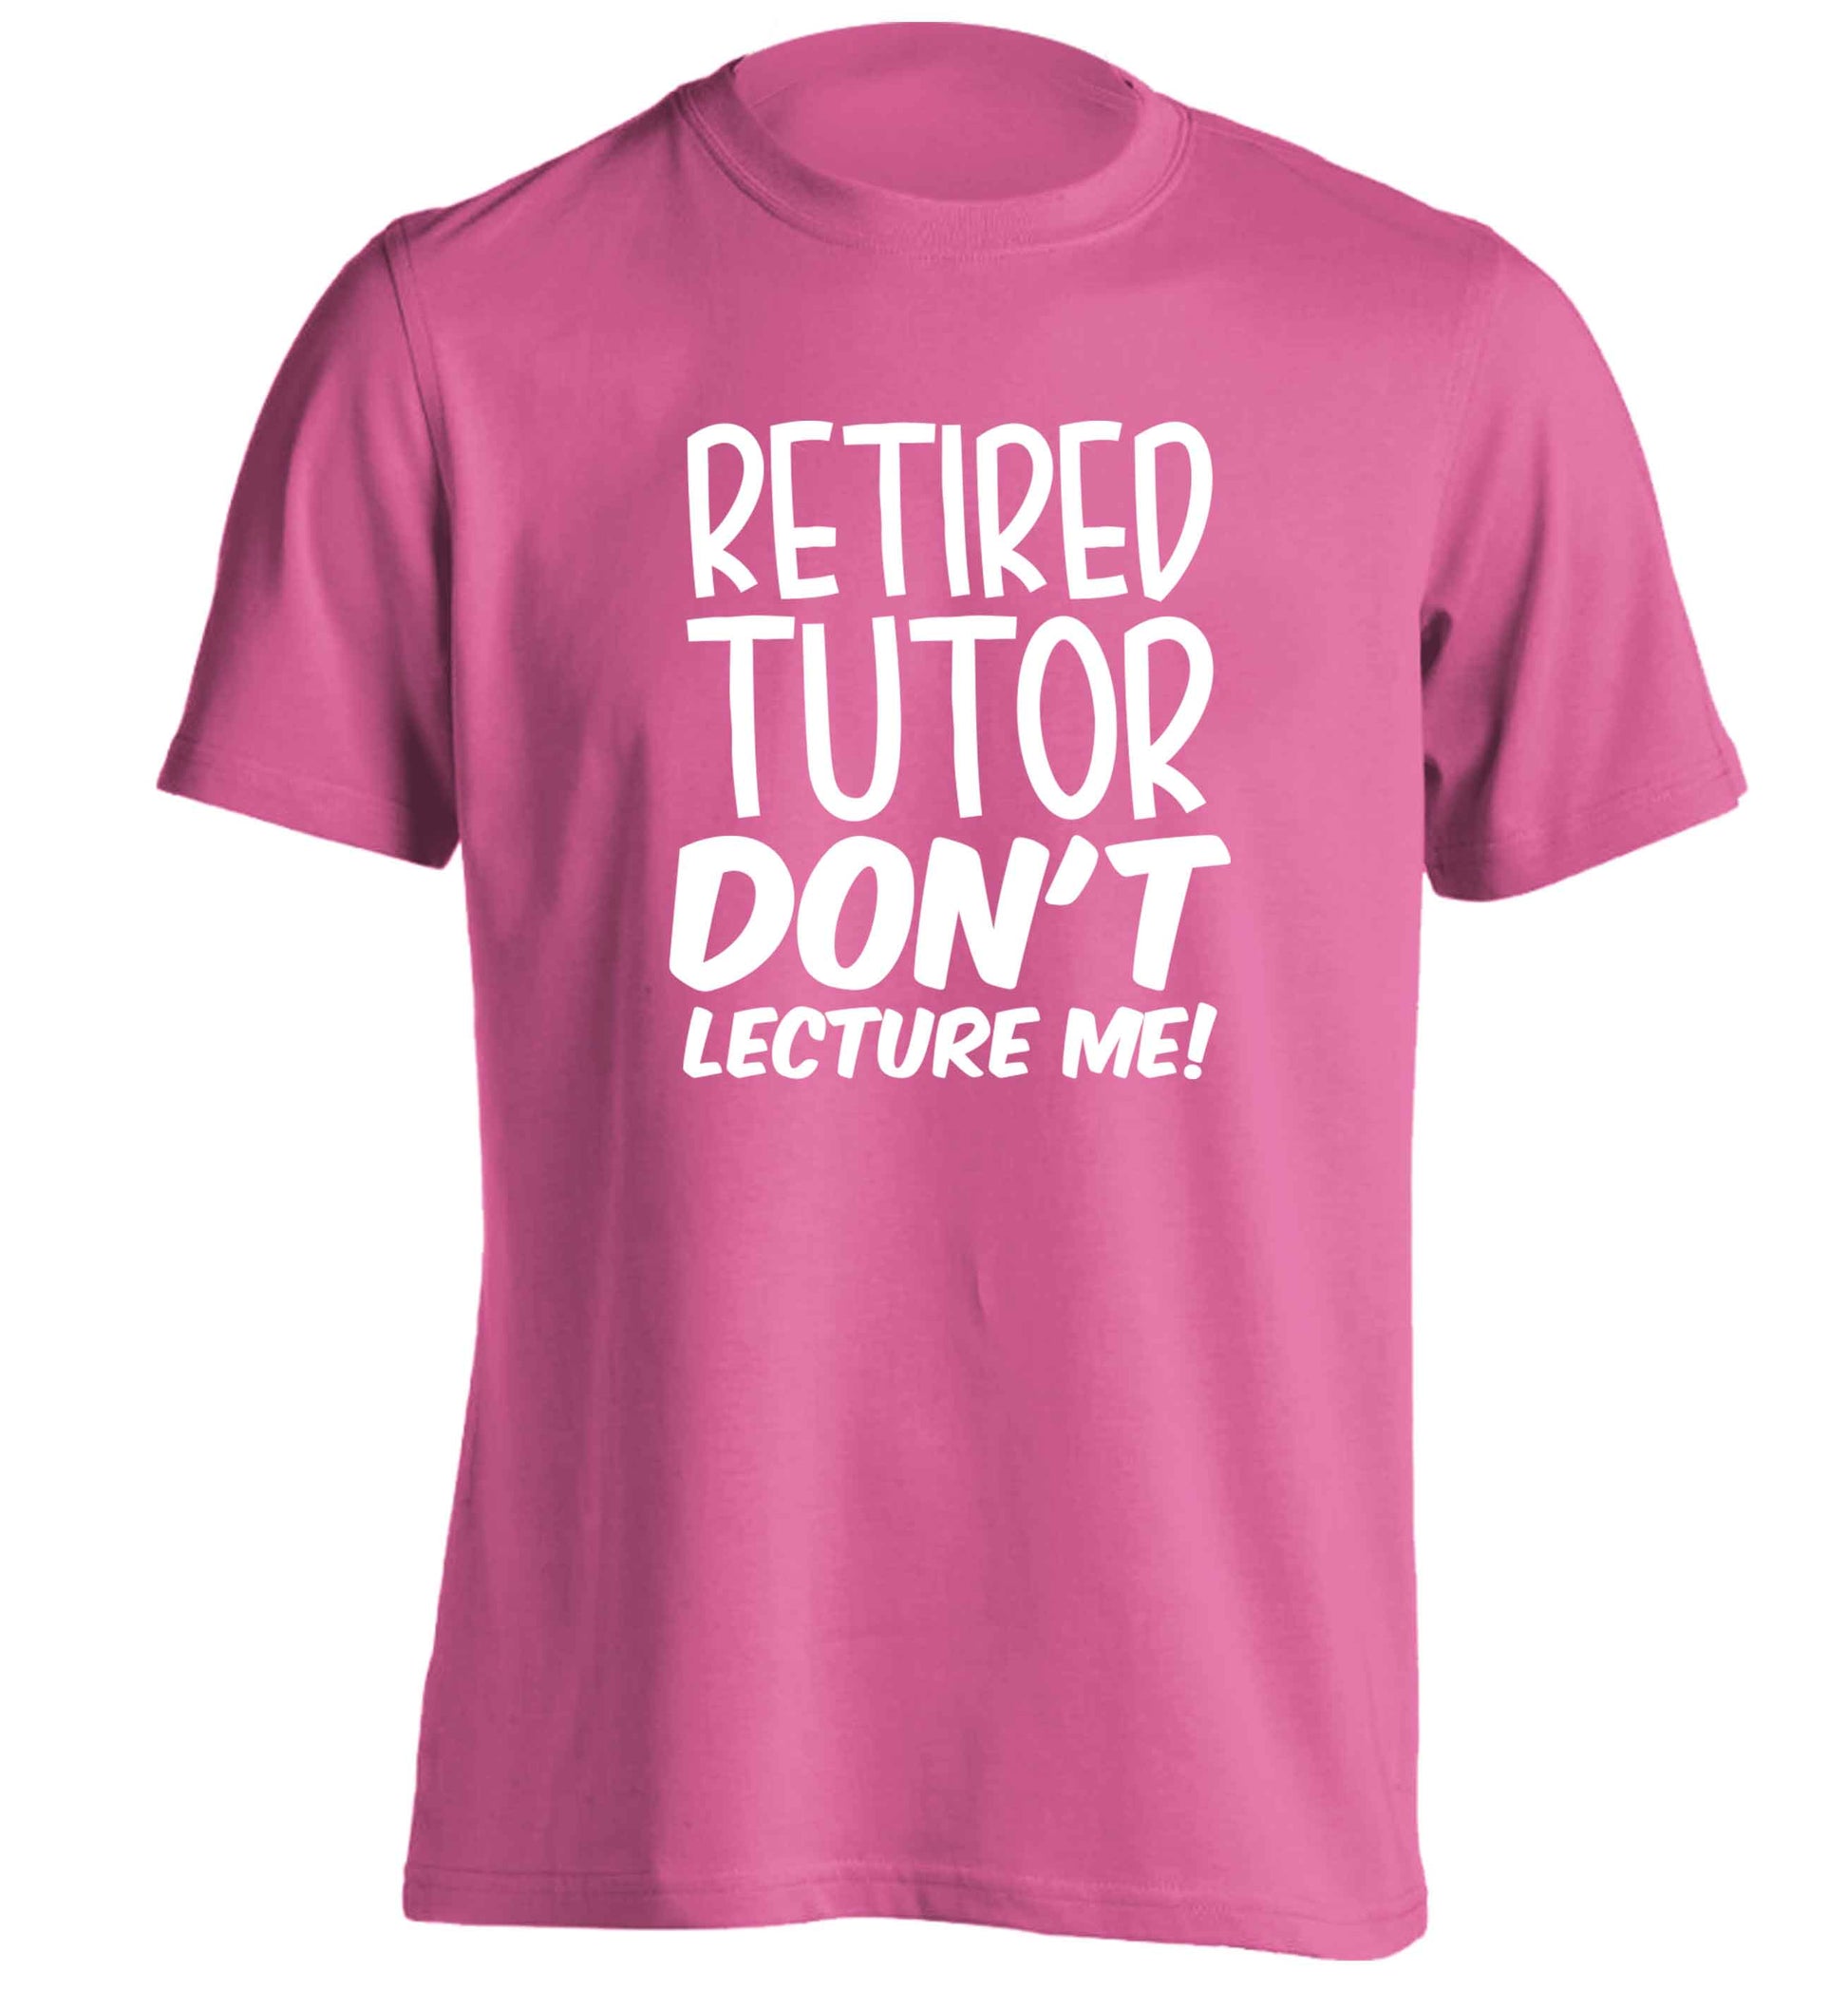 Retired tutor don't lecture me! adults unisex pink Tshirt 2XL